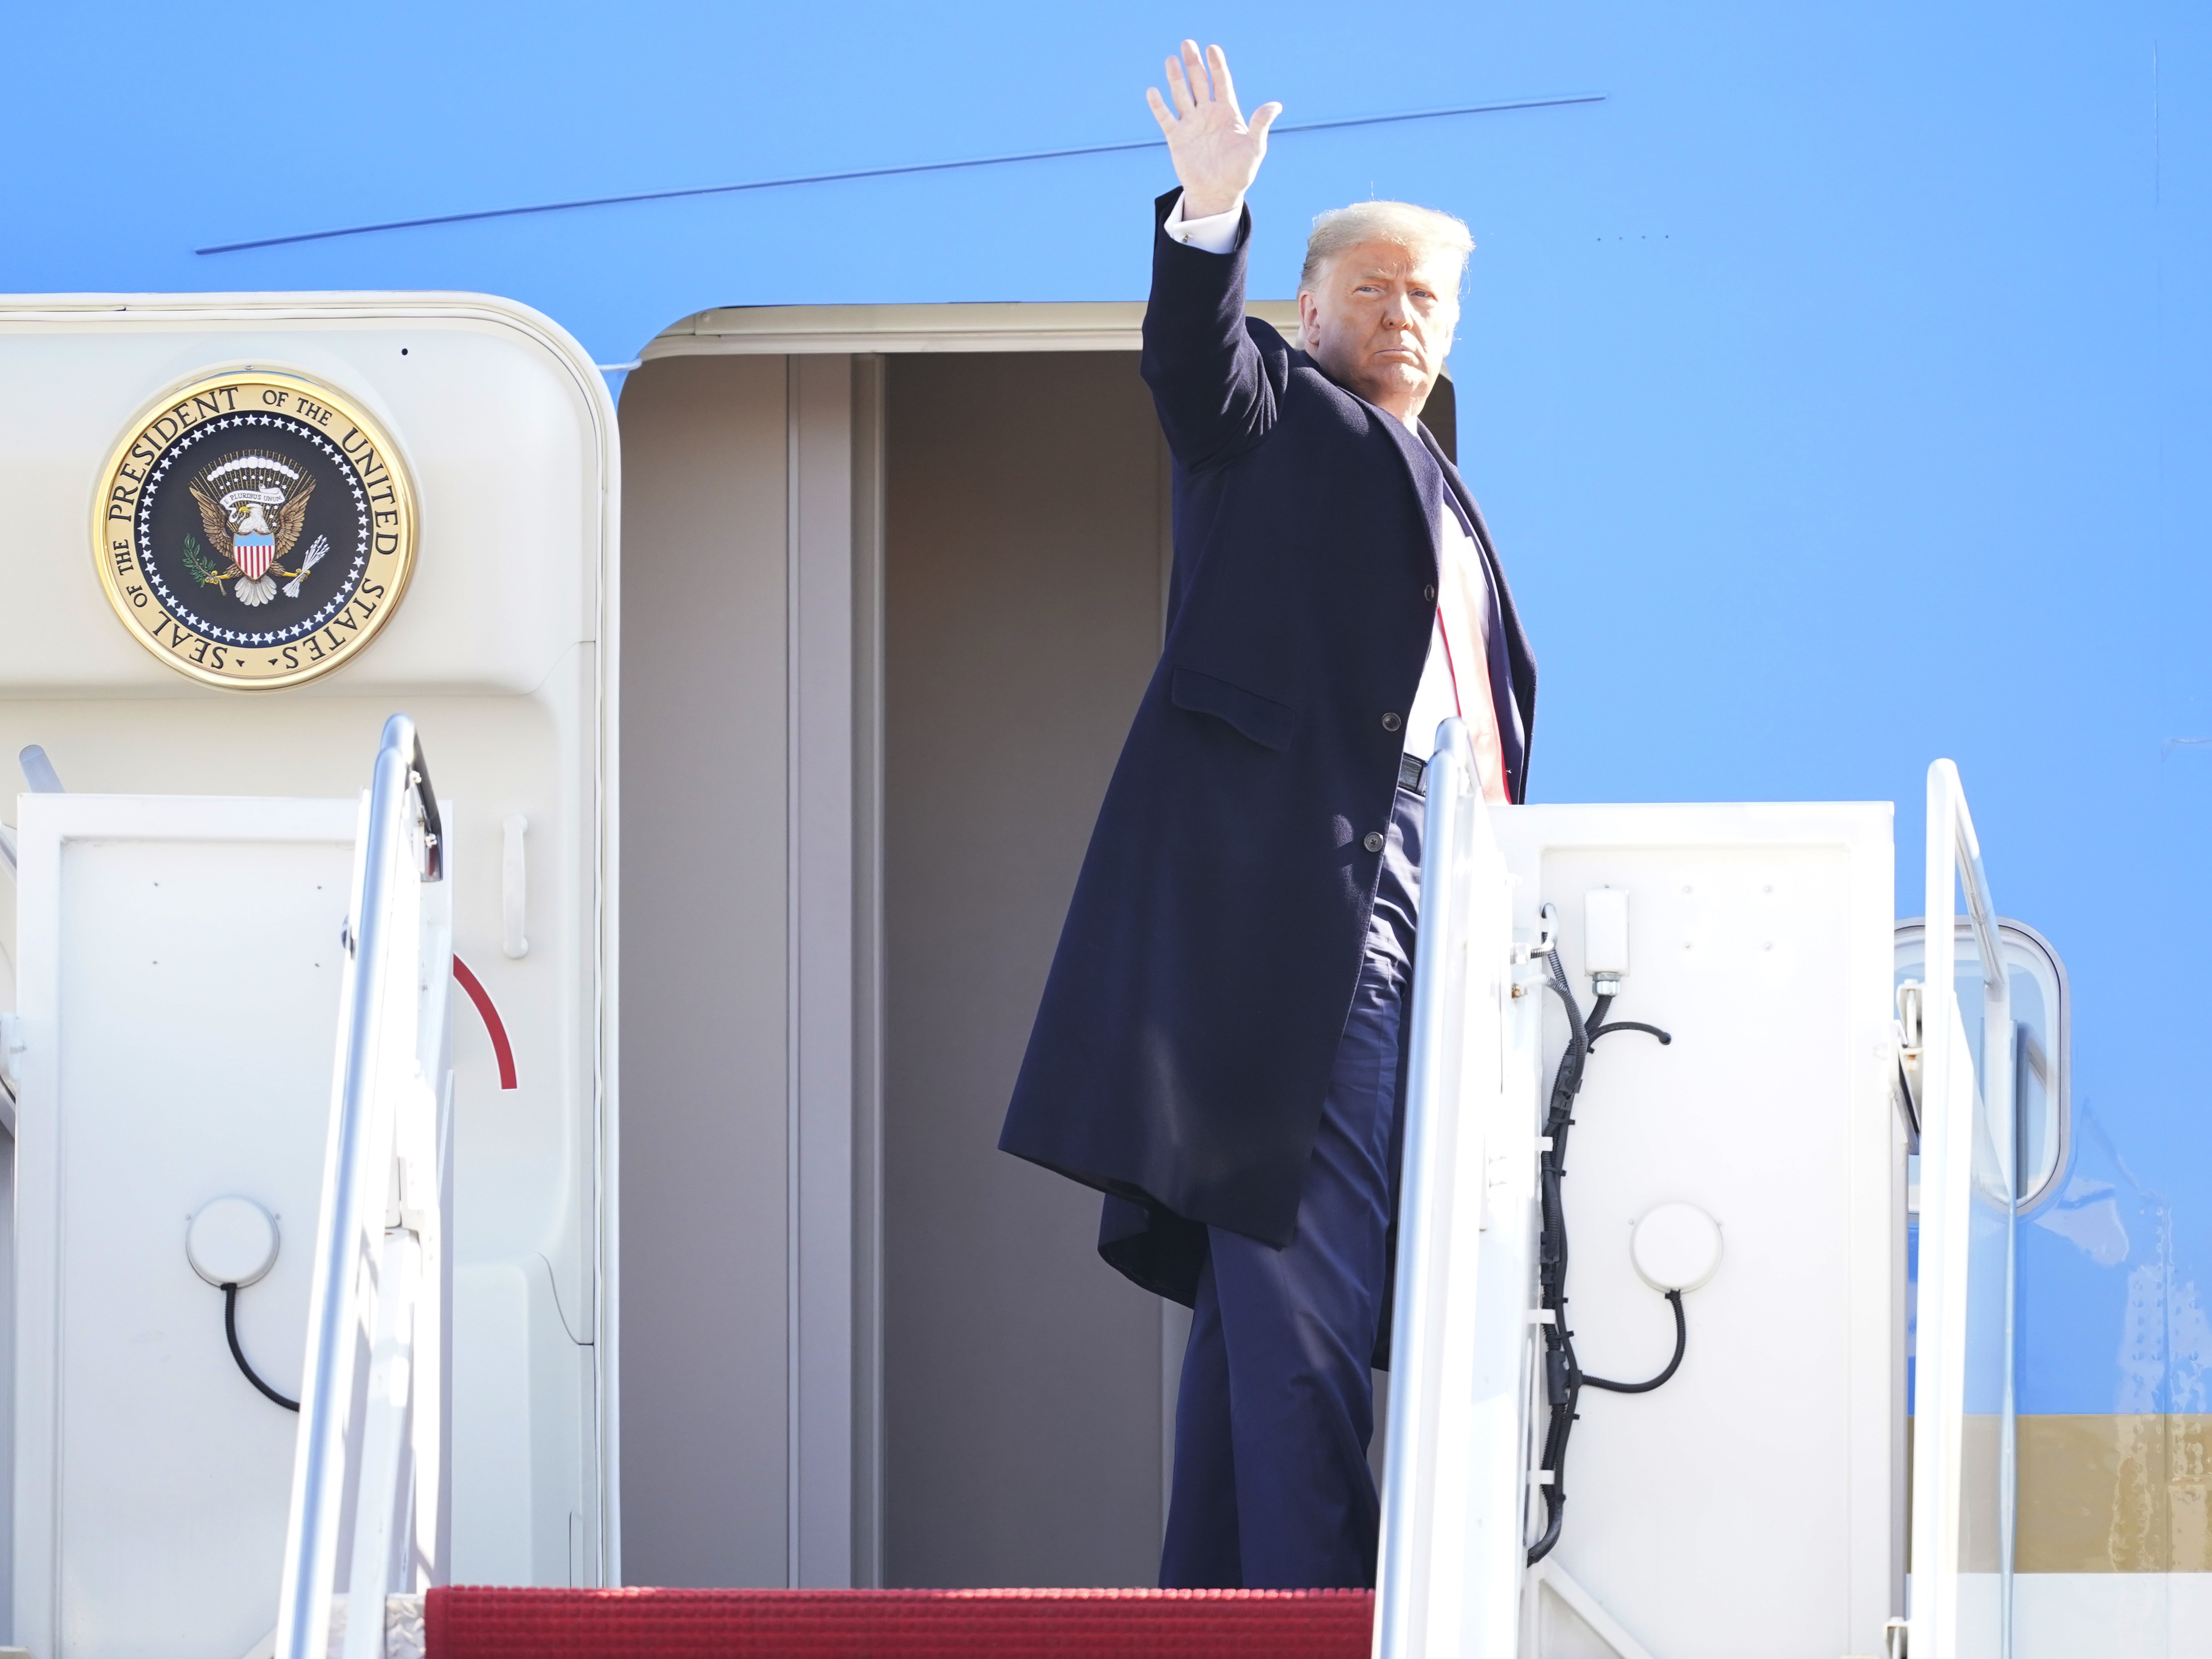 President Donald Trump waves while boarding Air Force One at Joint Base Andrews before a Jan. 12 trip to Texas. He's planning a departure ceremony there on Wednesday, while skipping the traditional send-off at the Capitol. Manuel Balce Ceneta/AP